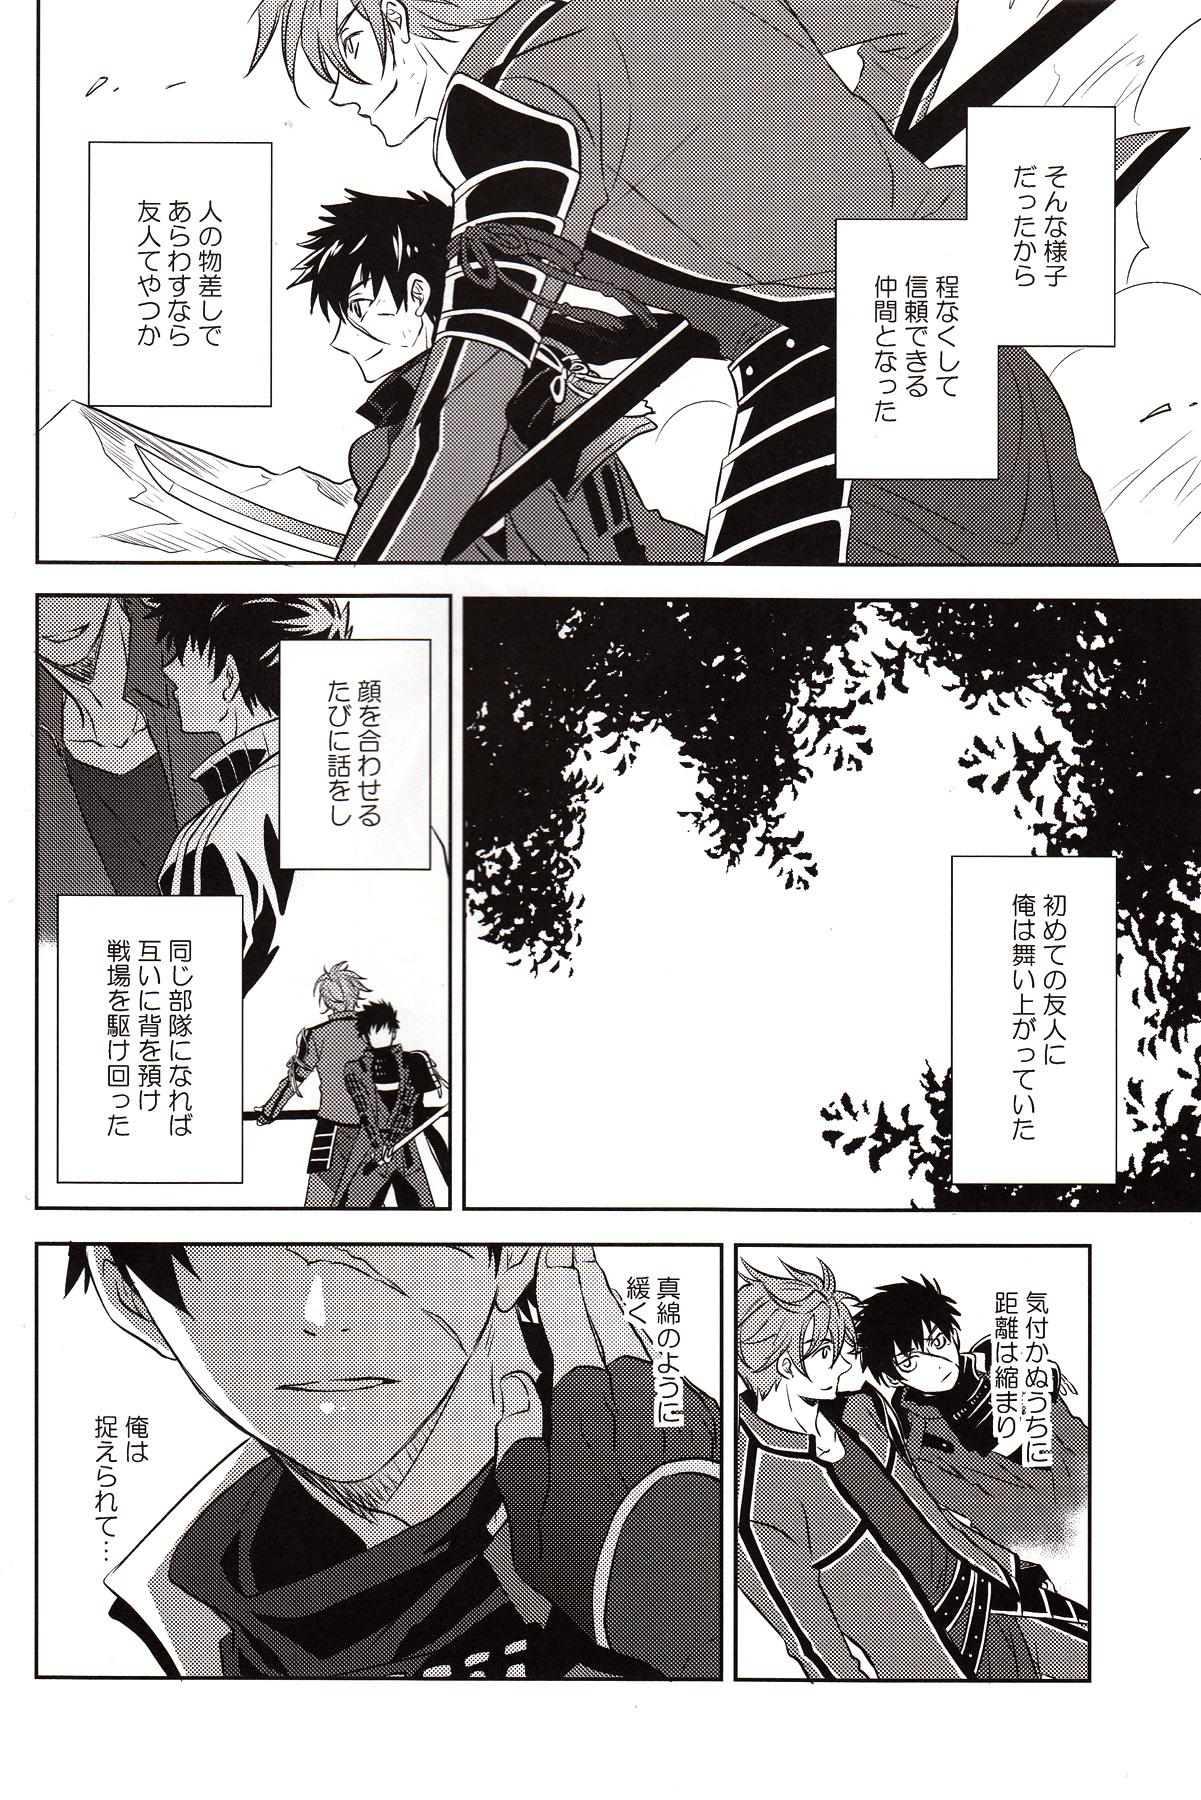 Stretching The Name of it - Touken ranbu Male - Page 5